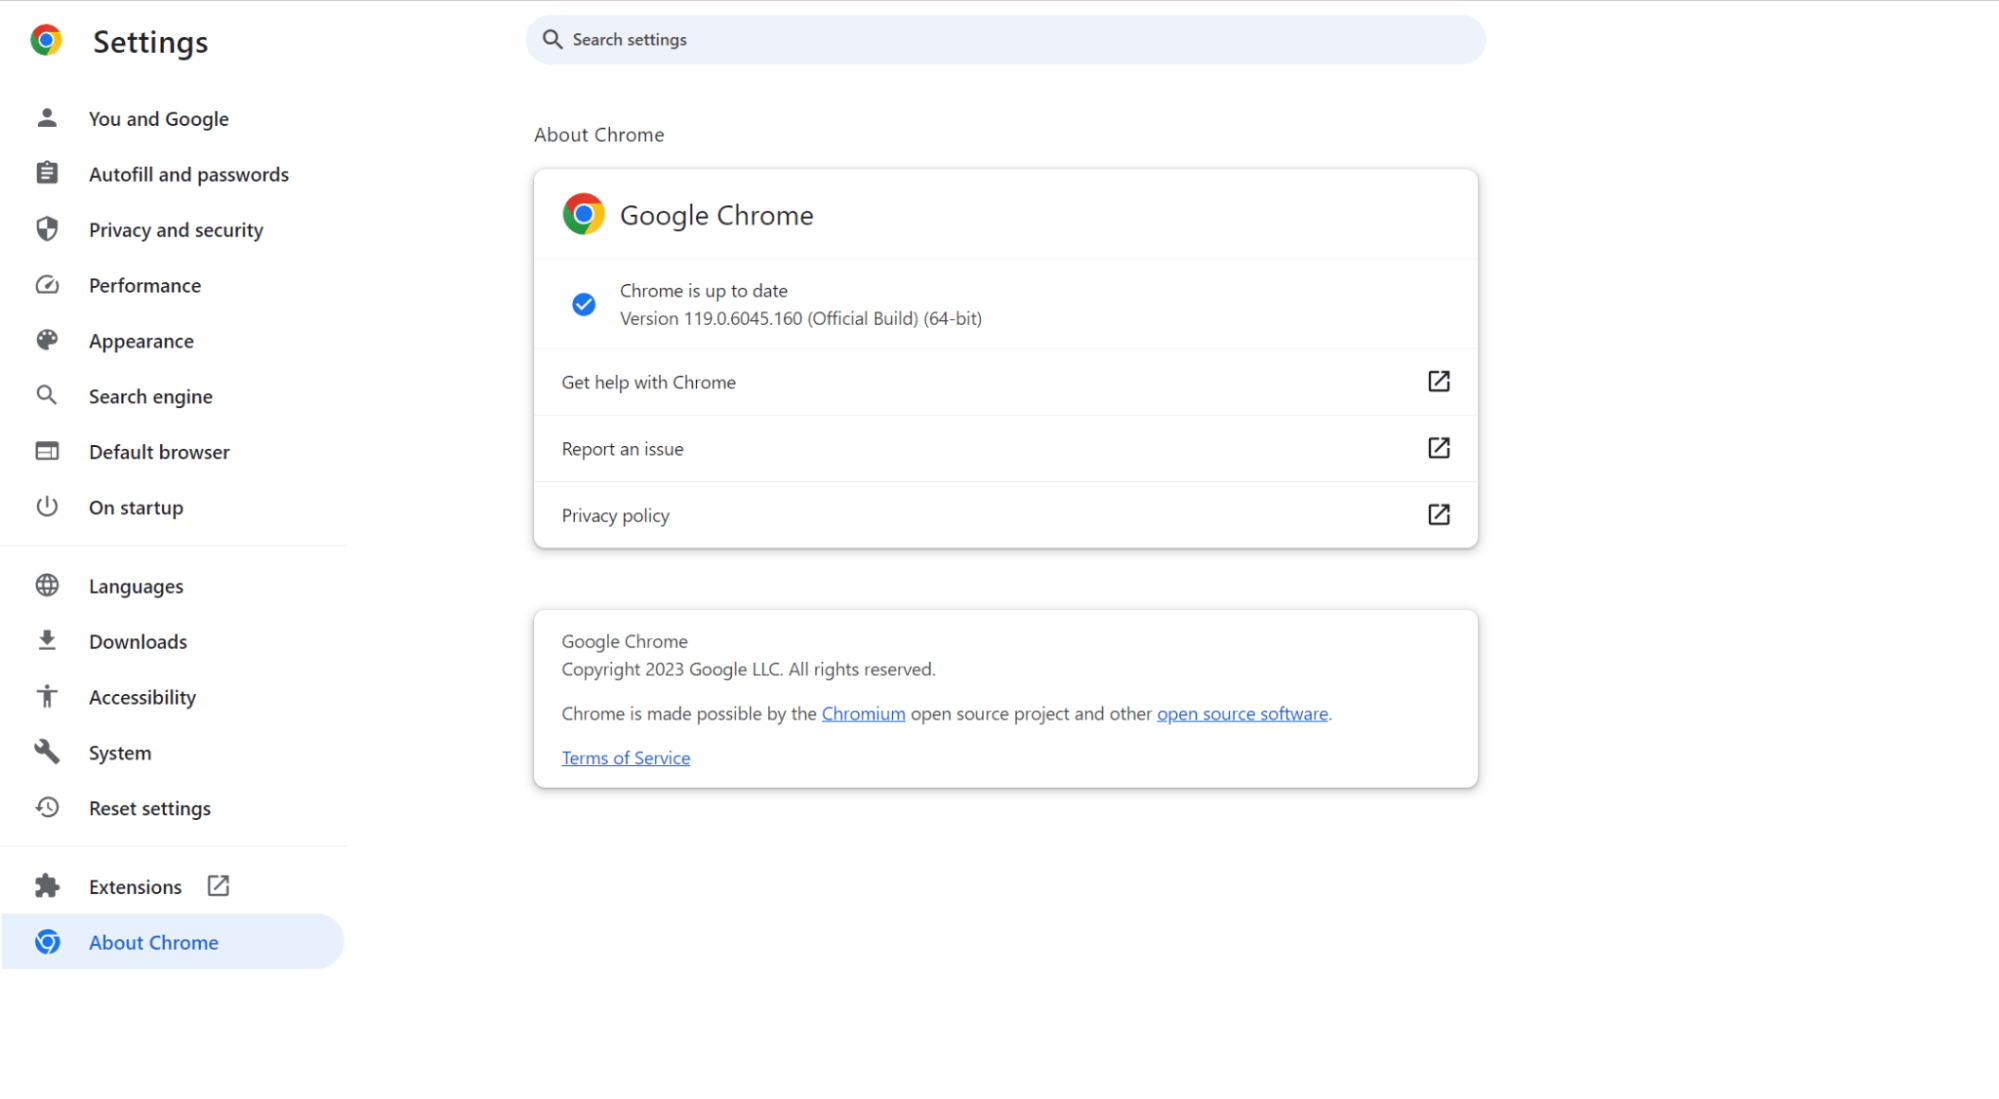 a screenshot of "About Chrome".